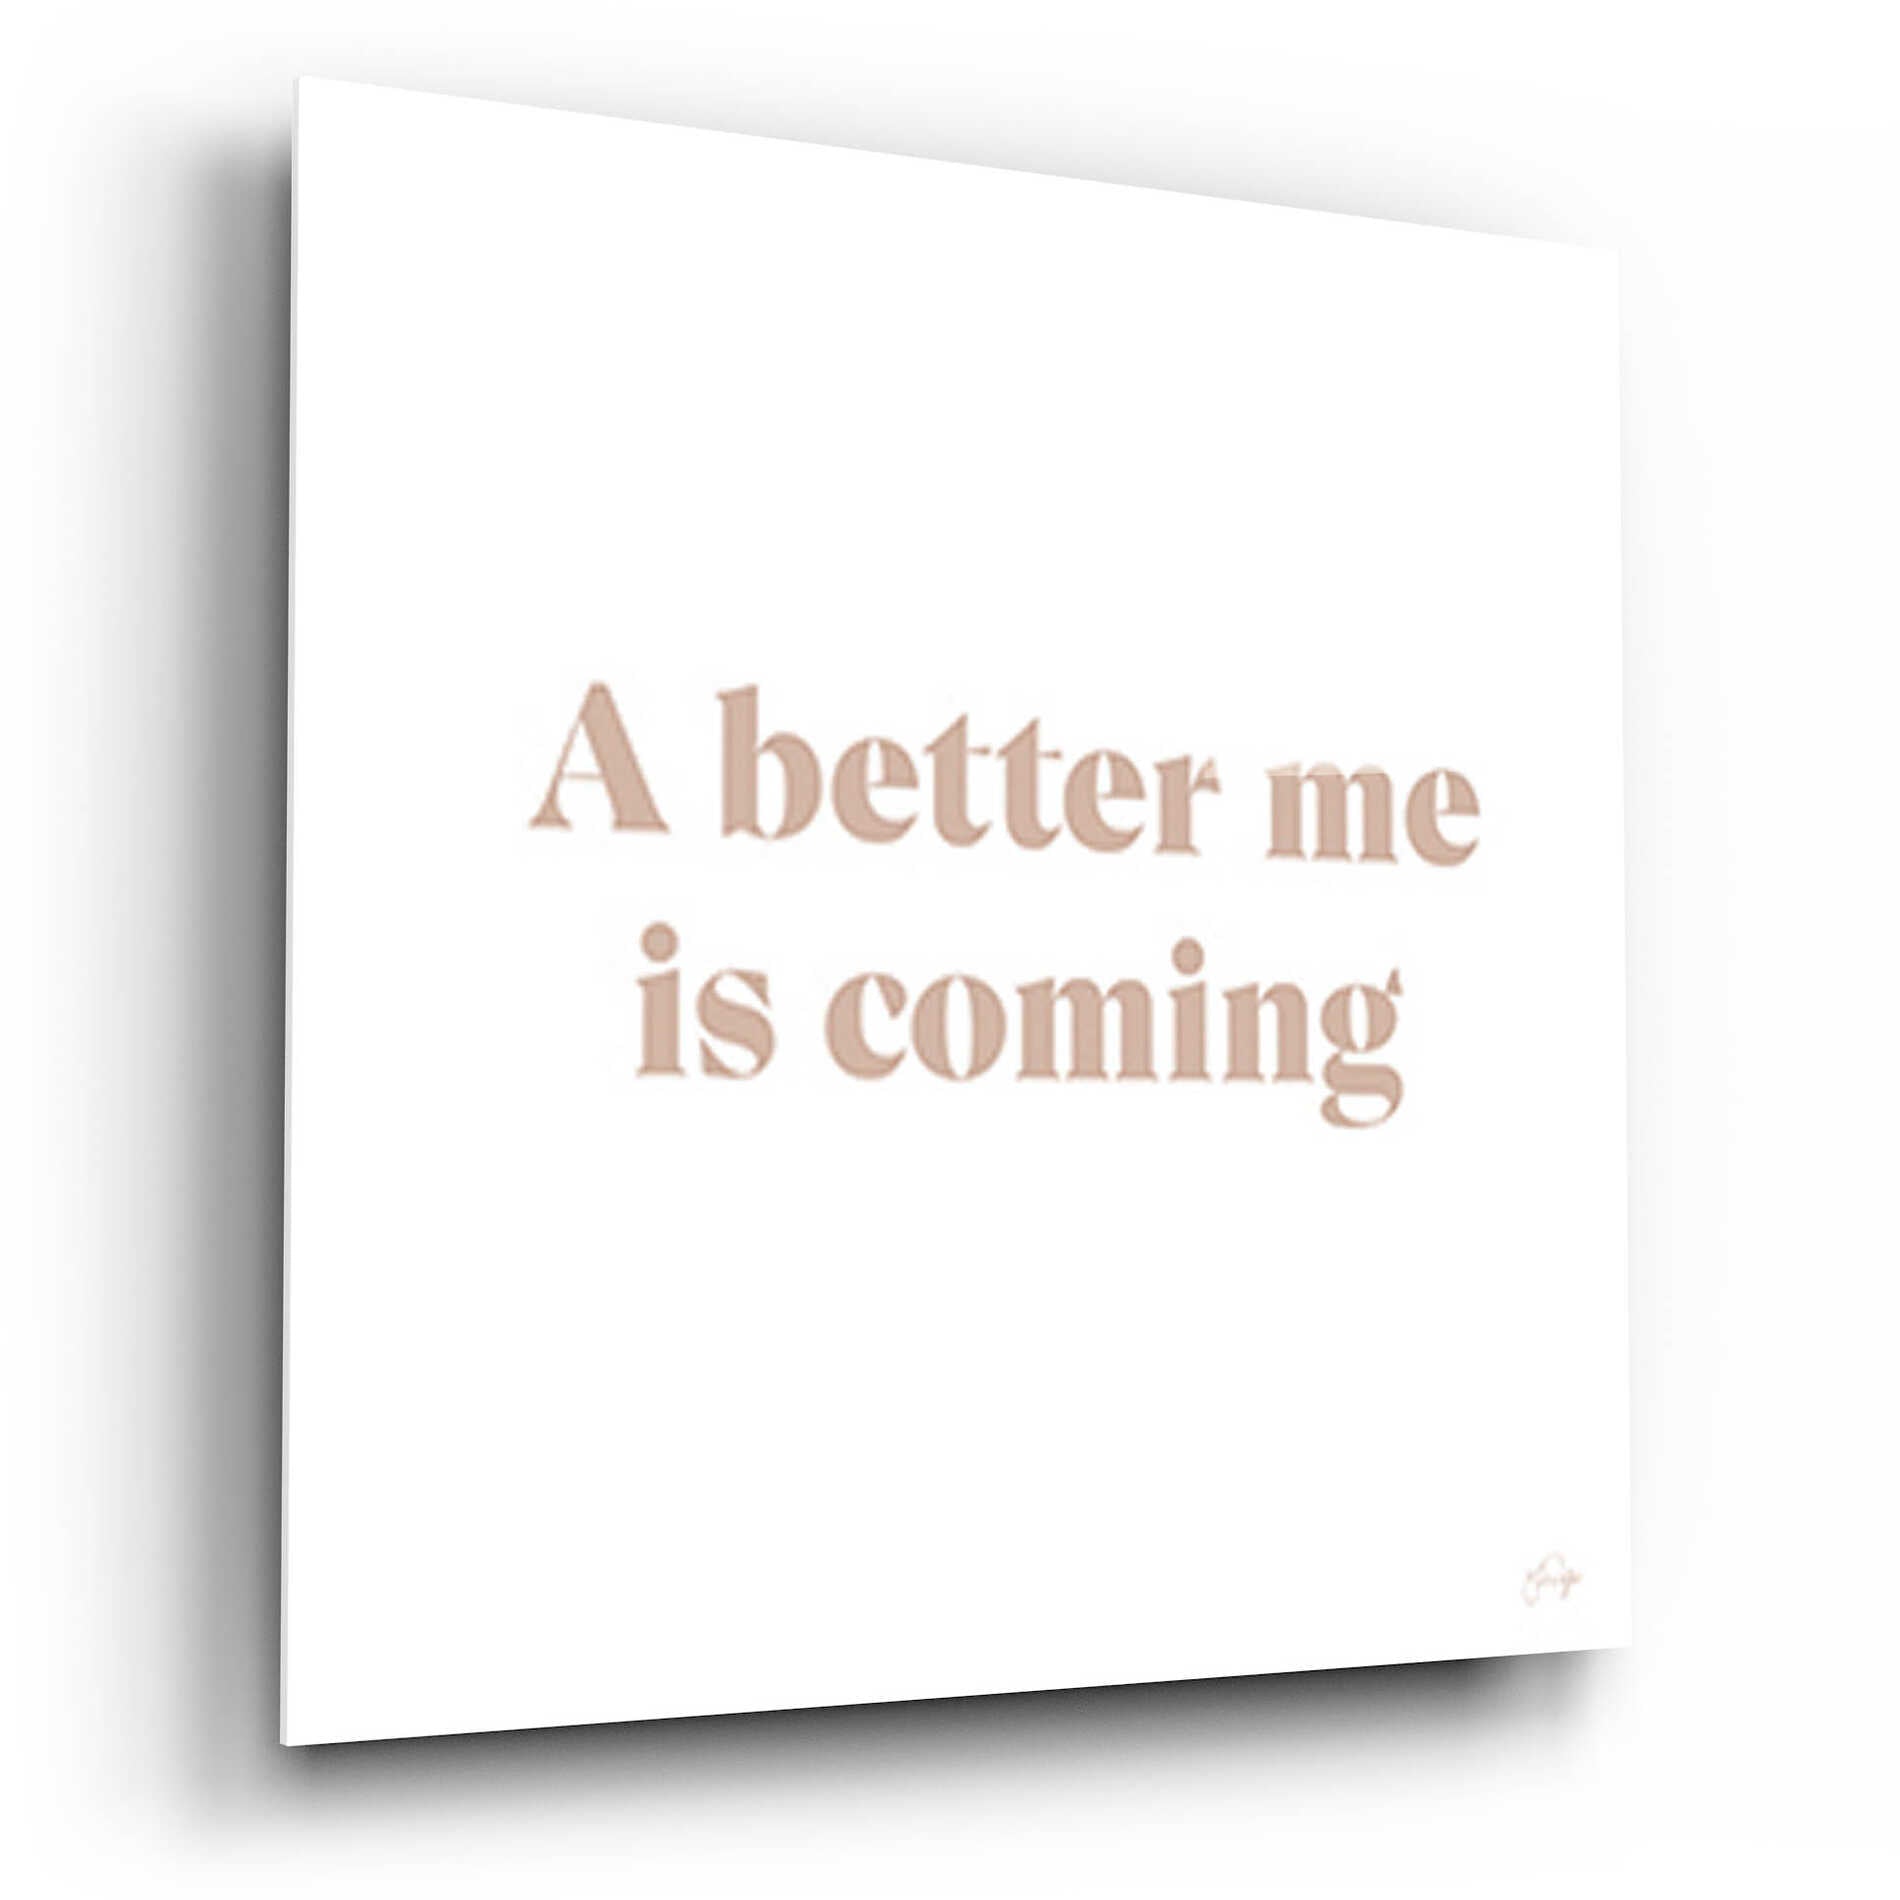 Epic Art 'A Better Me is Coming' by Yass Naffas Designs, Acrylic Glass Wall Art,12x12